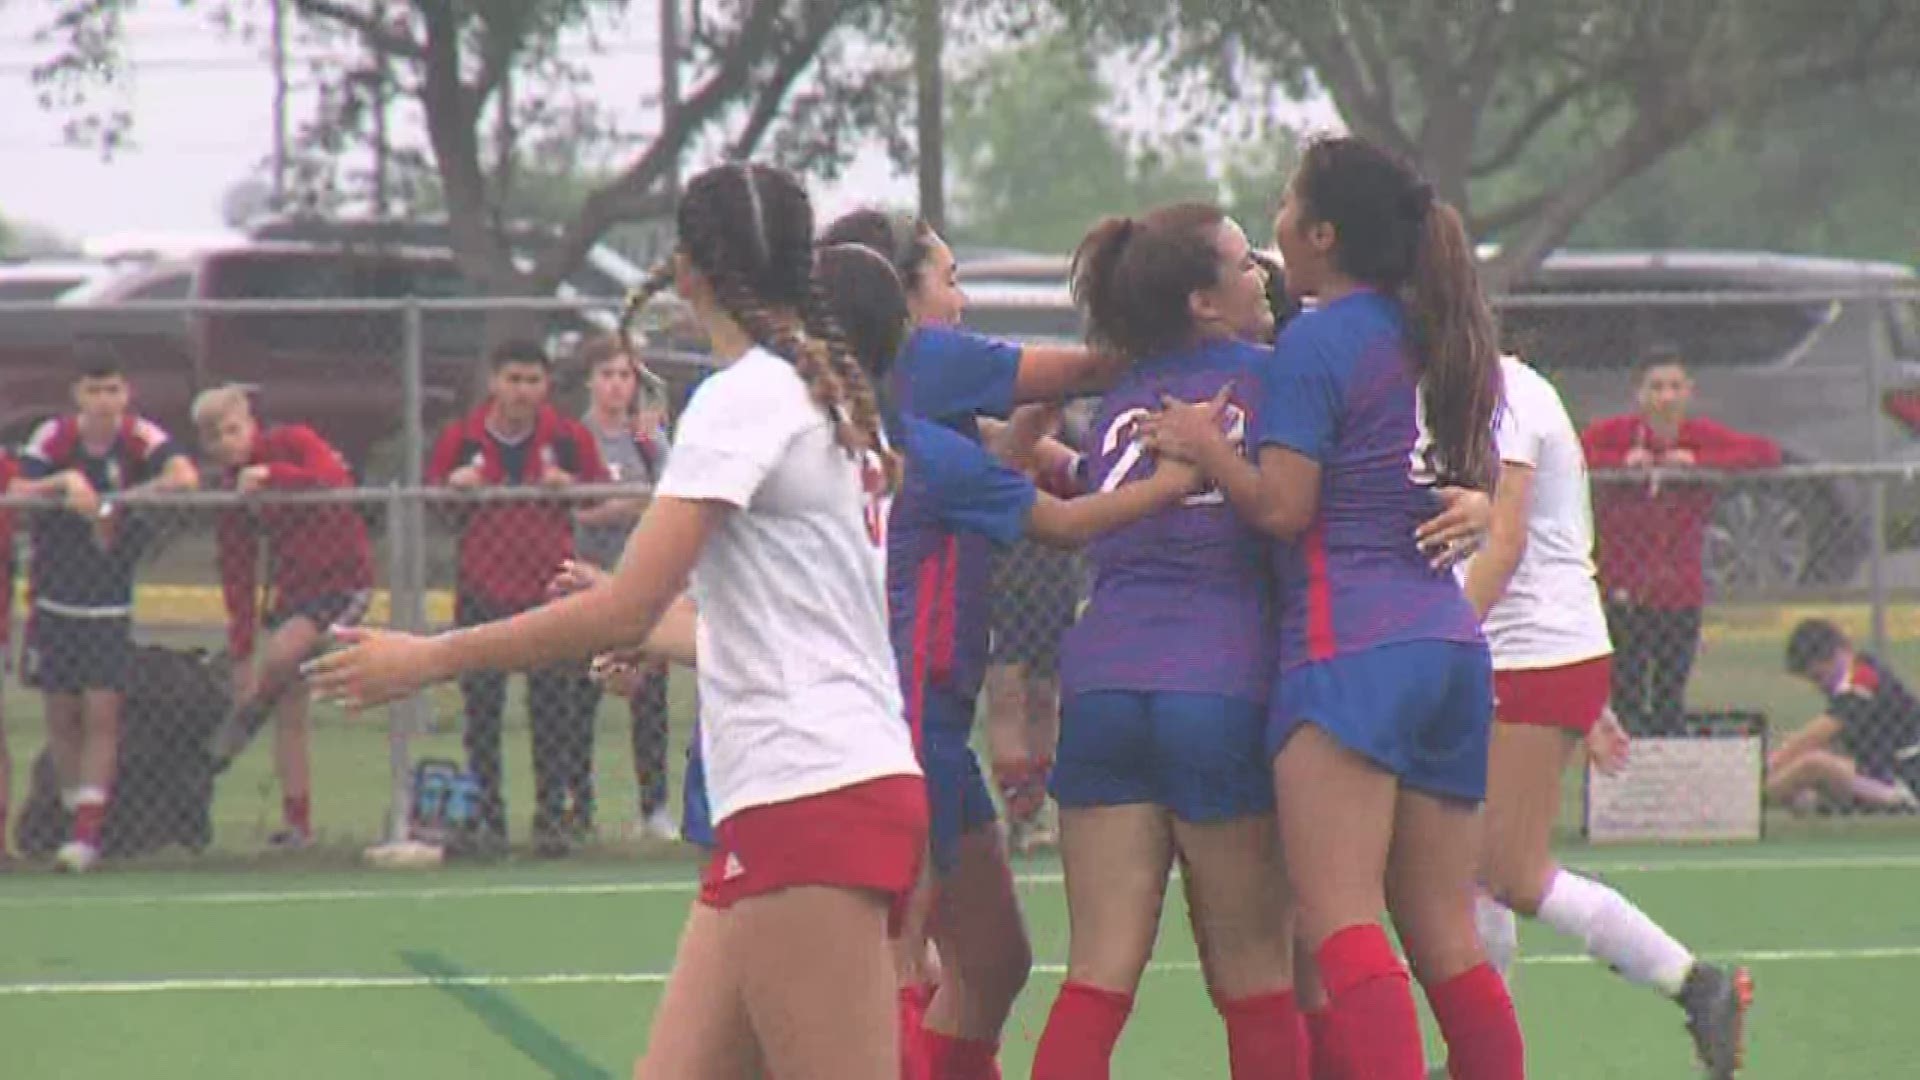 The G-p and Beeville girls are only area teams remaining in the soccer playoffs after Friday night's action.